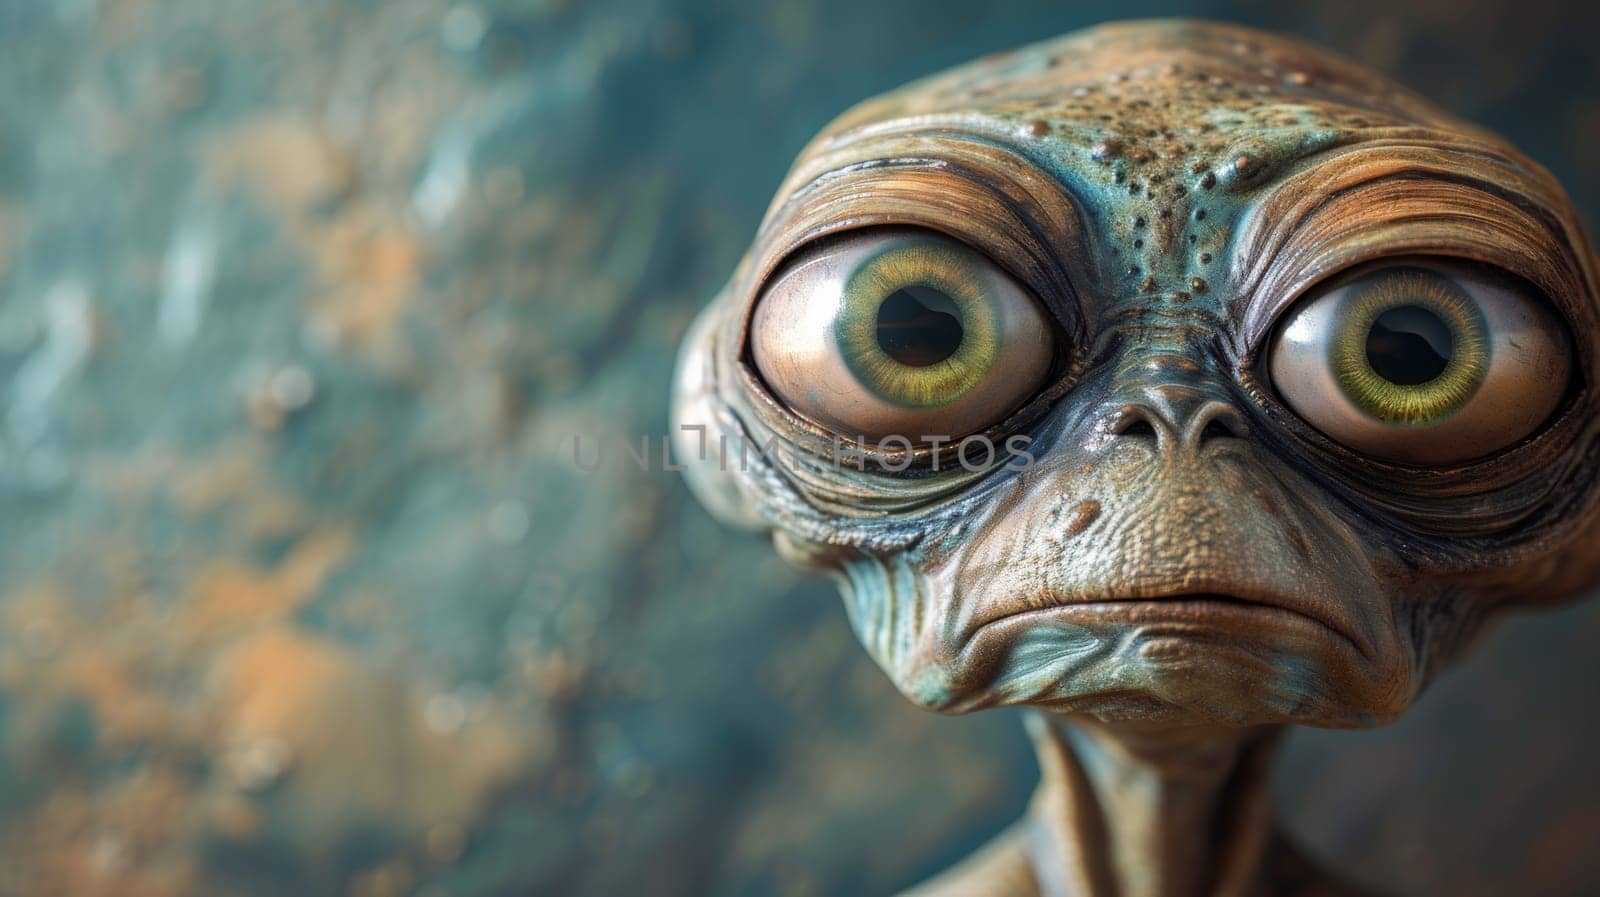 A close up of a creepy looking alien with big eyes, AI by starush